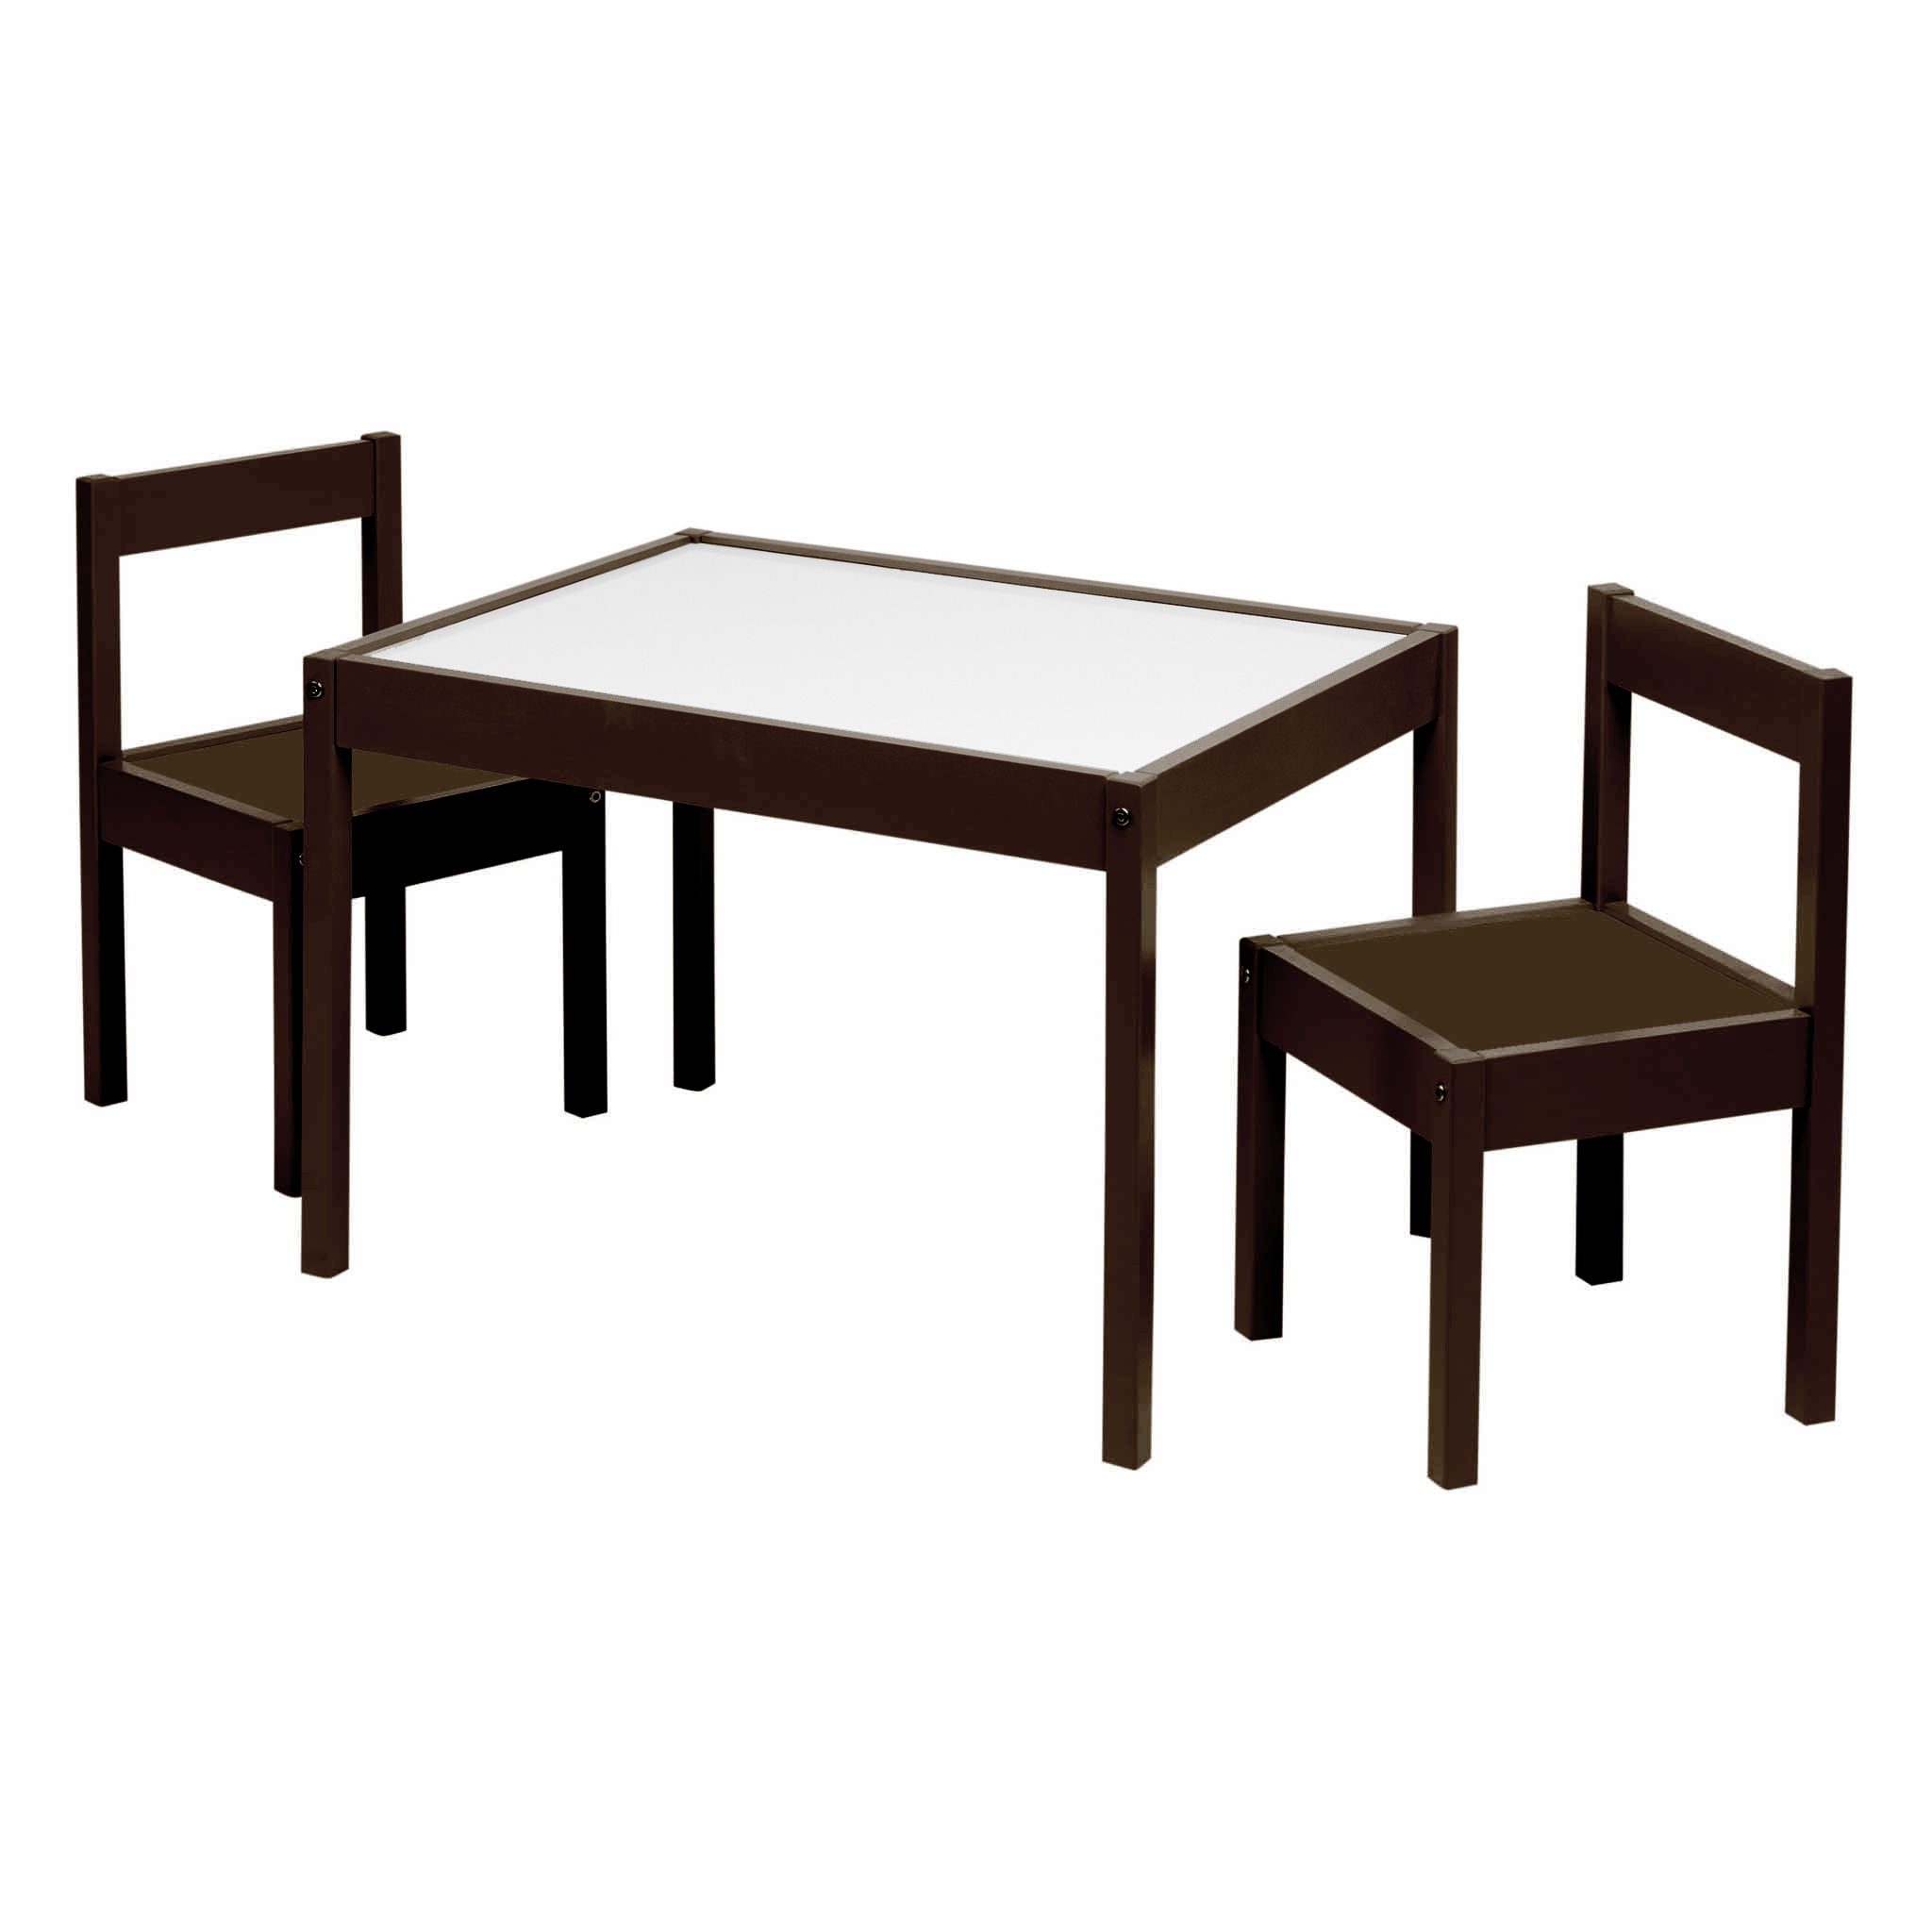 Your Zone Child 3-Piece Table and Chairs Set, in Espresso Age Group 1 to 5 Years Old. - image 1 of 6